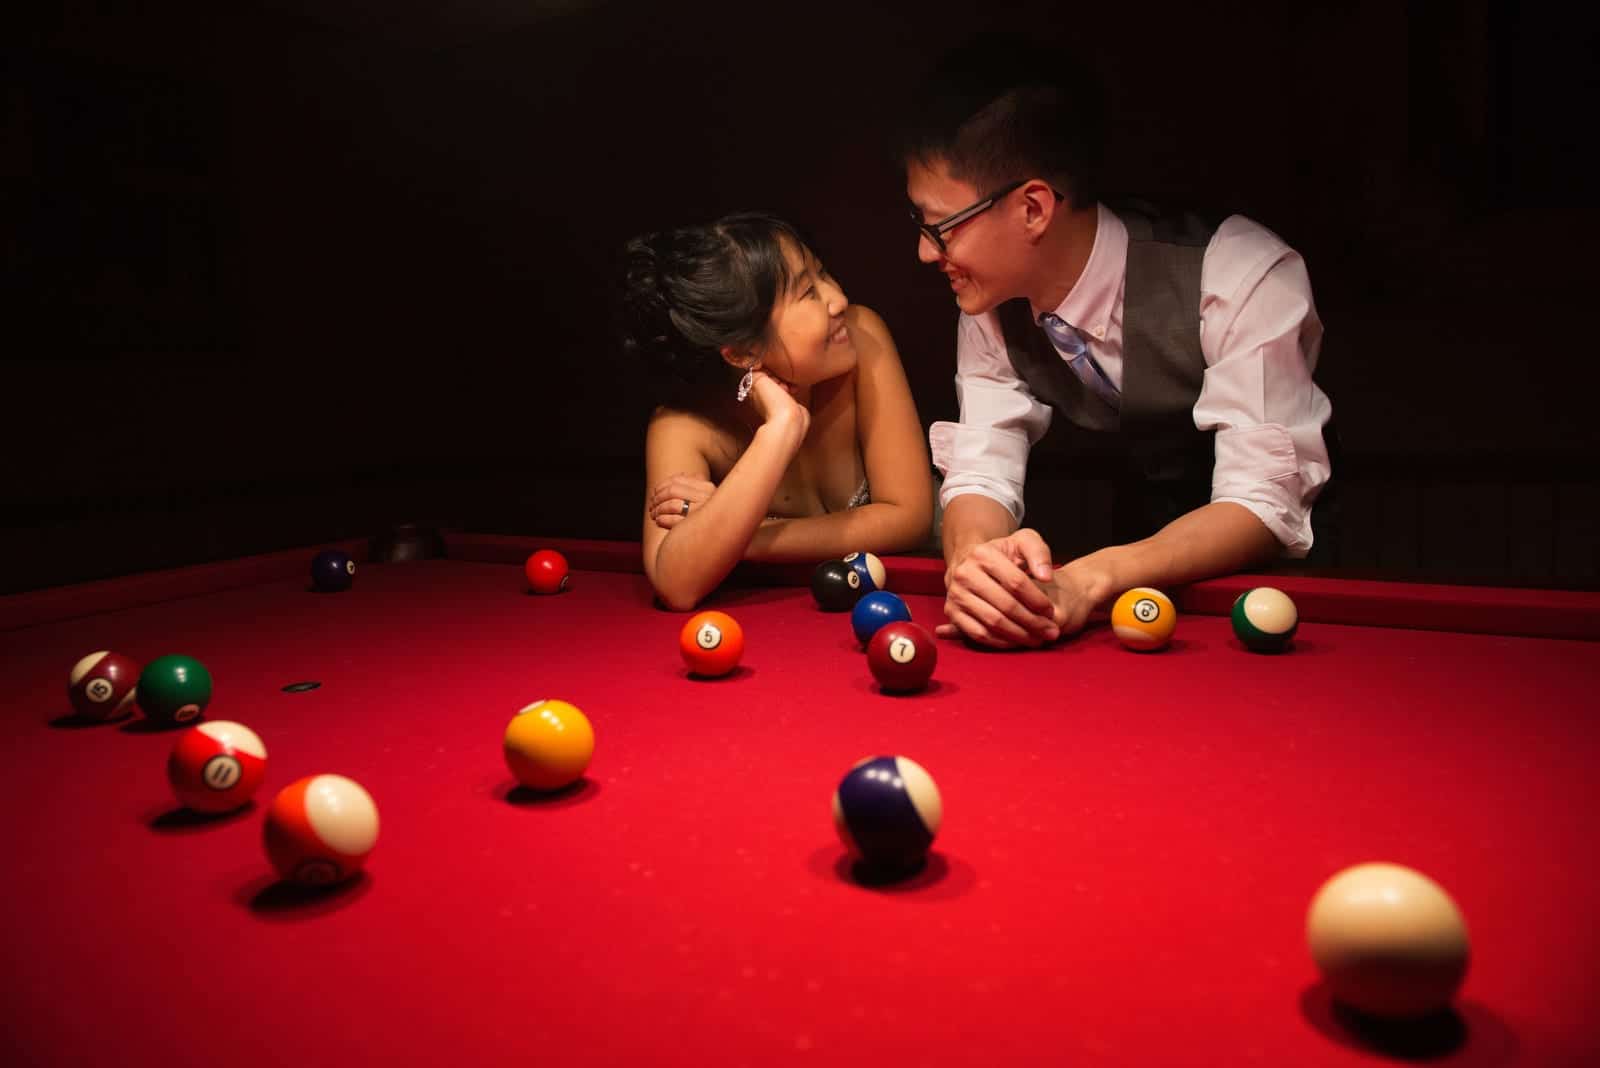 A bride and groom smile at each other as they lean on a pool table with a red felt top at the Grand Estate at Hidden Acres.